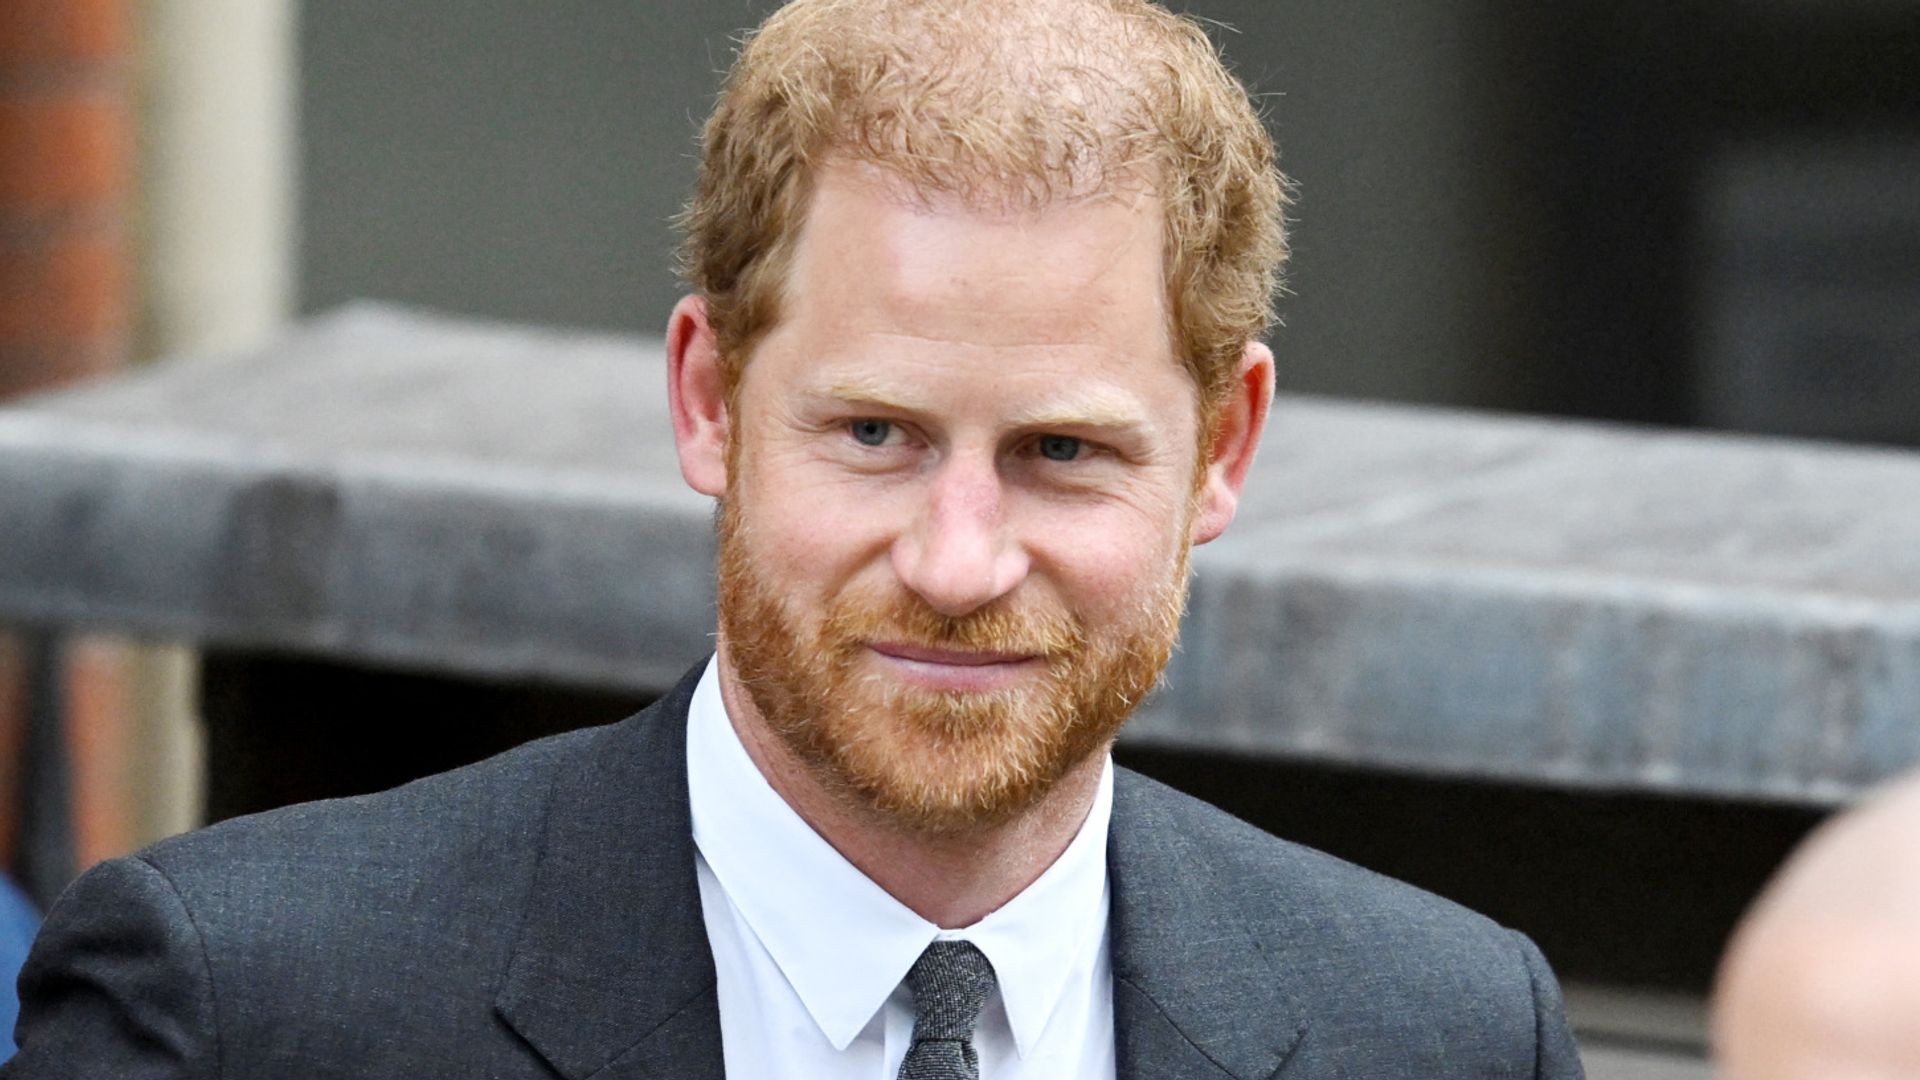 Prince Harry returning to UK for first time since visiting King after his cancer diagnosis